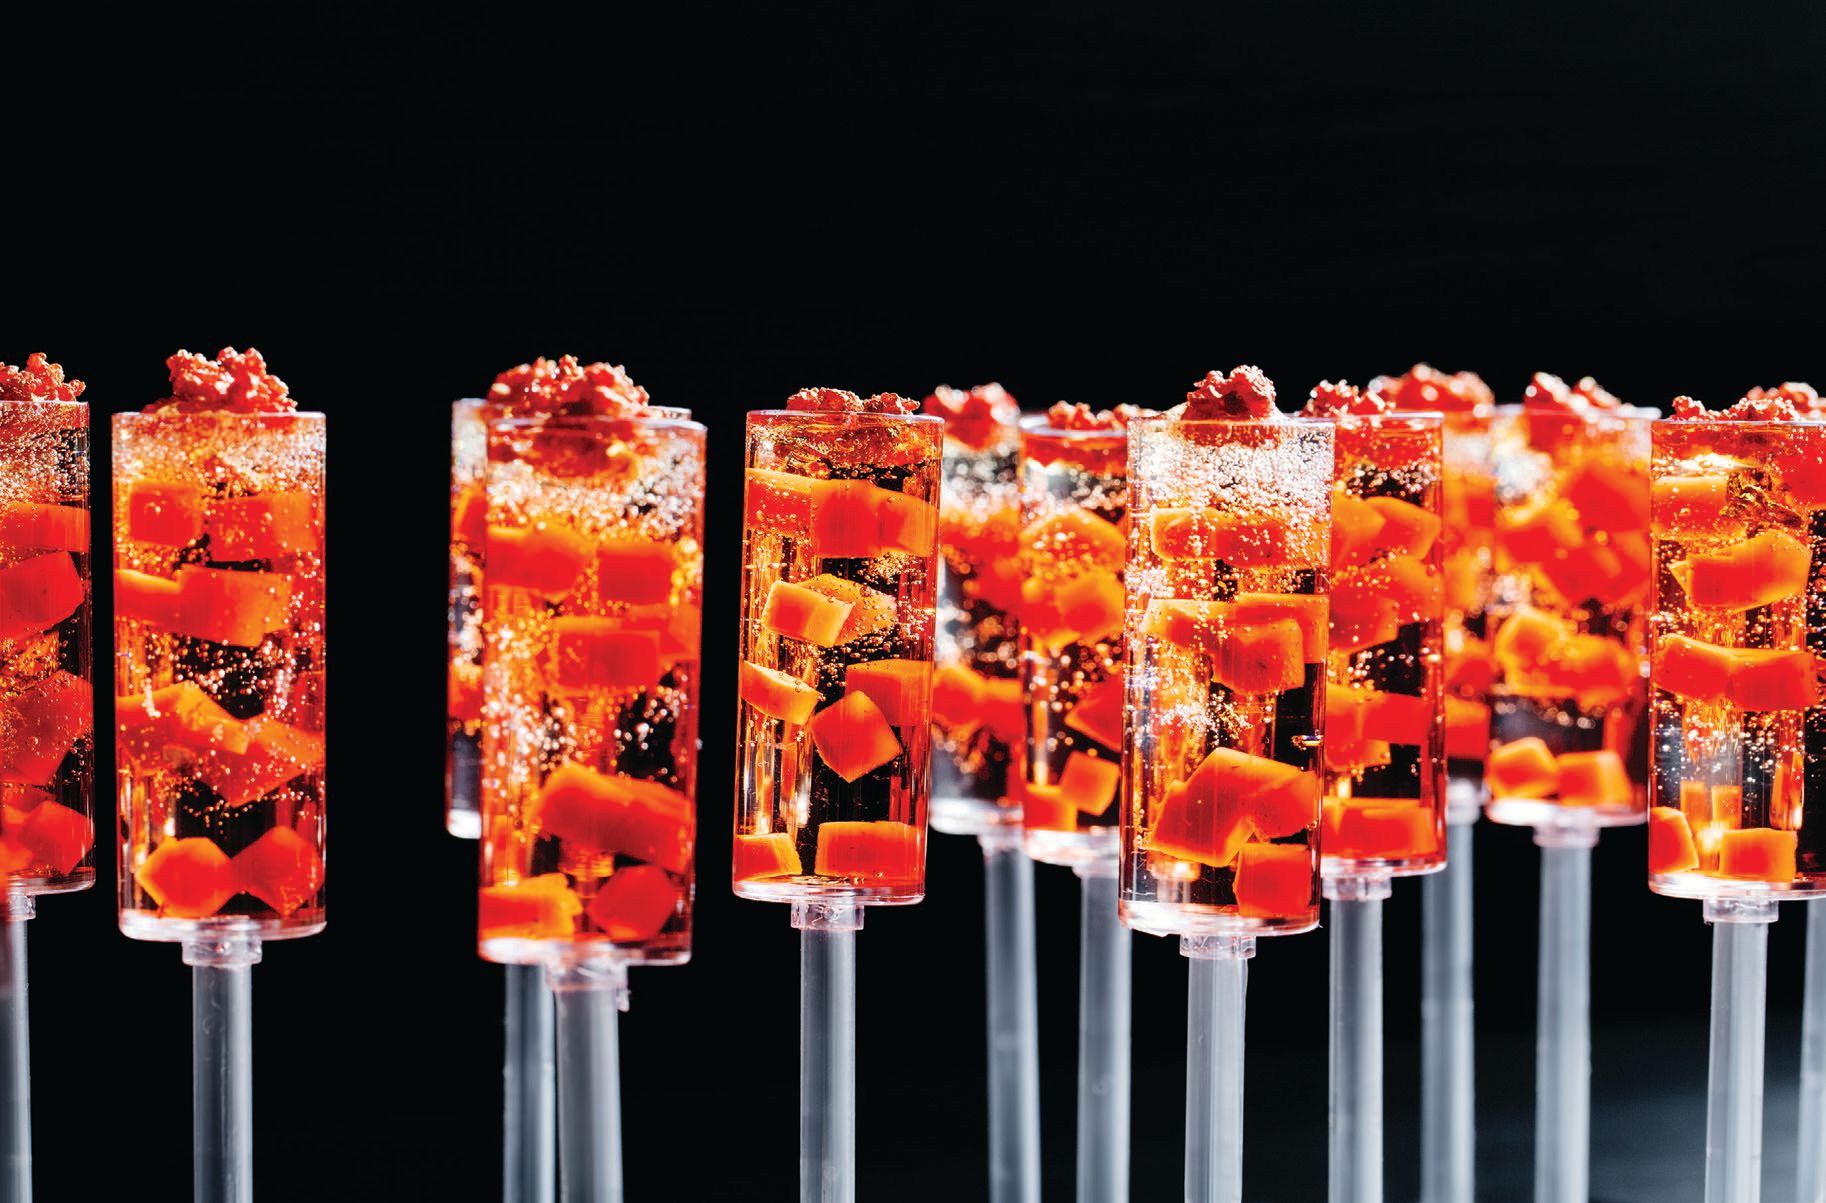 Wolfgang Puck’s Champagne push pops PHOTO: BY AUDREY MA